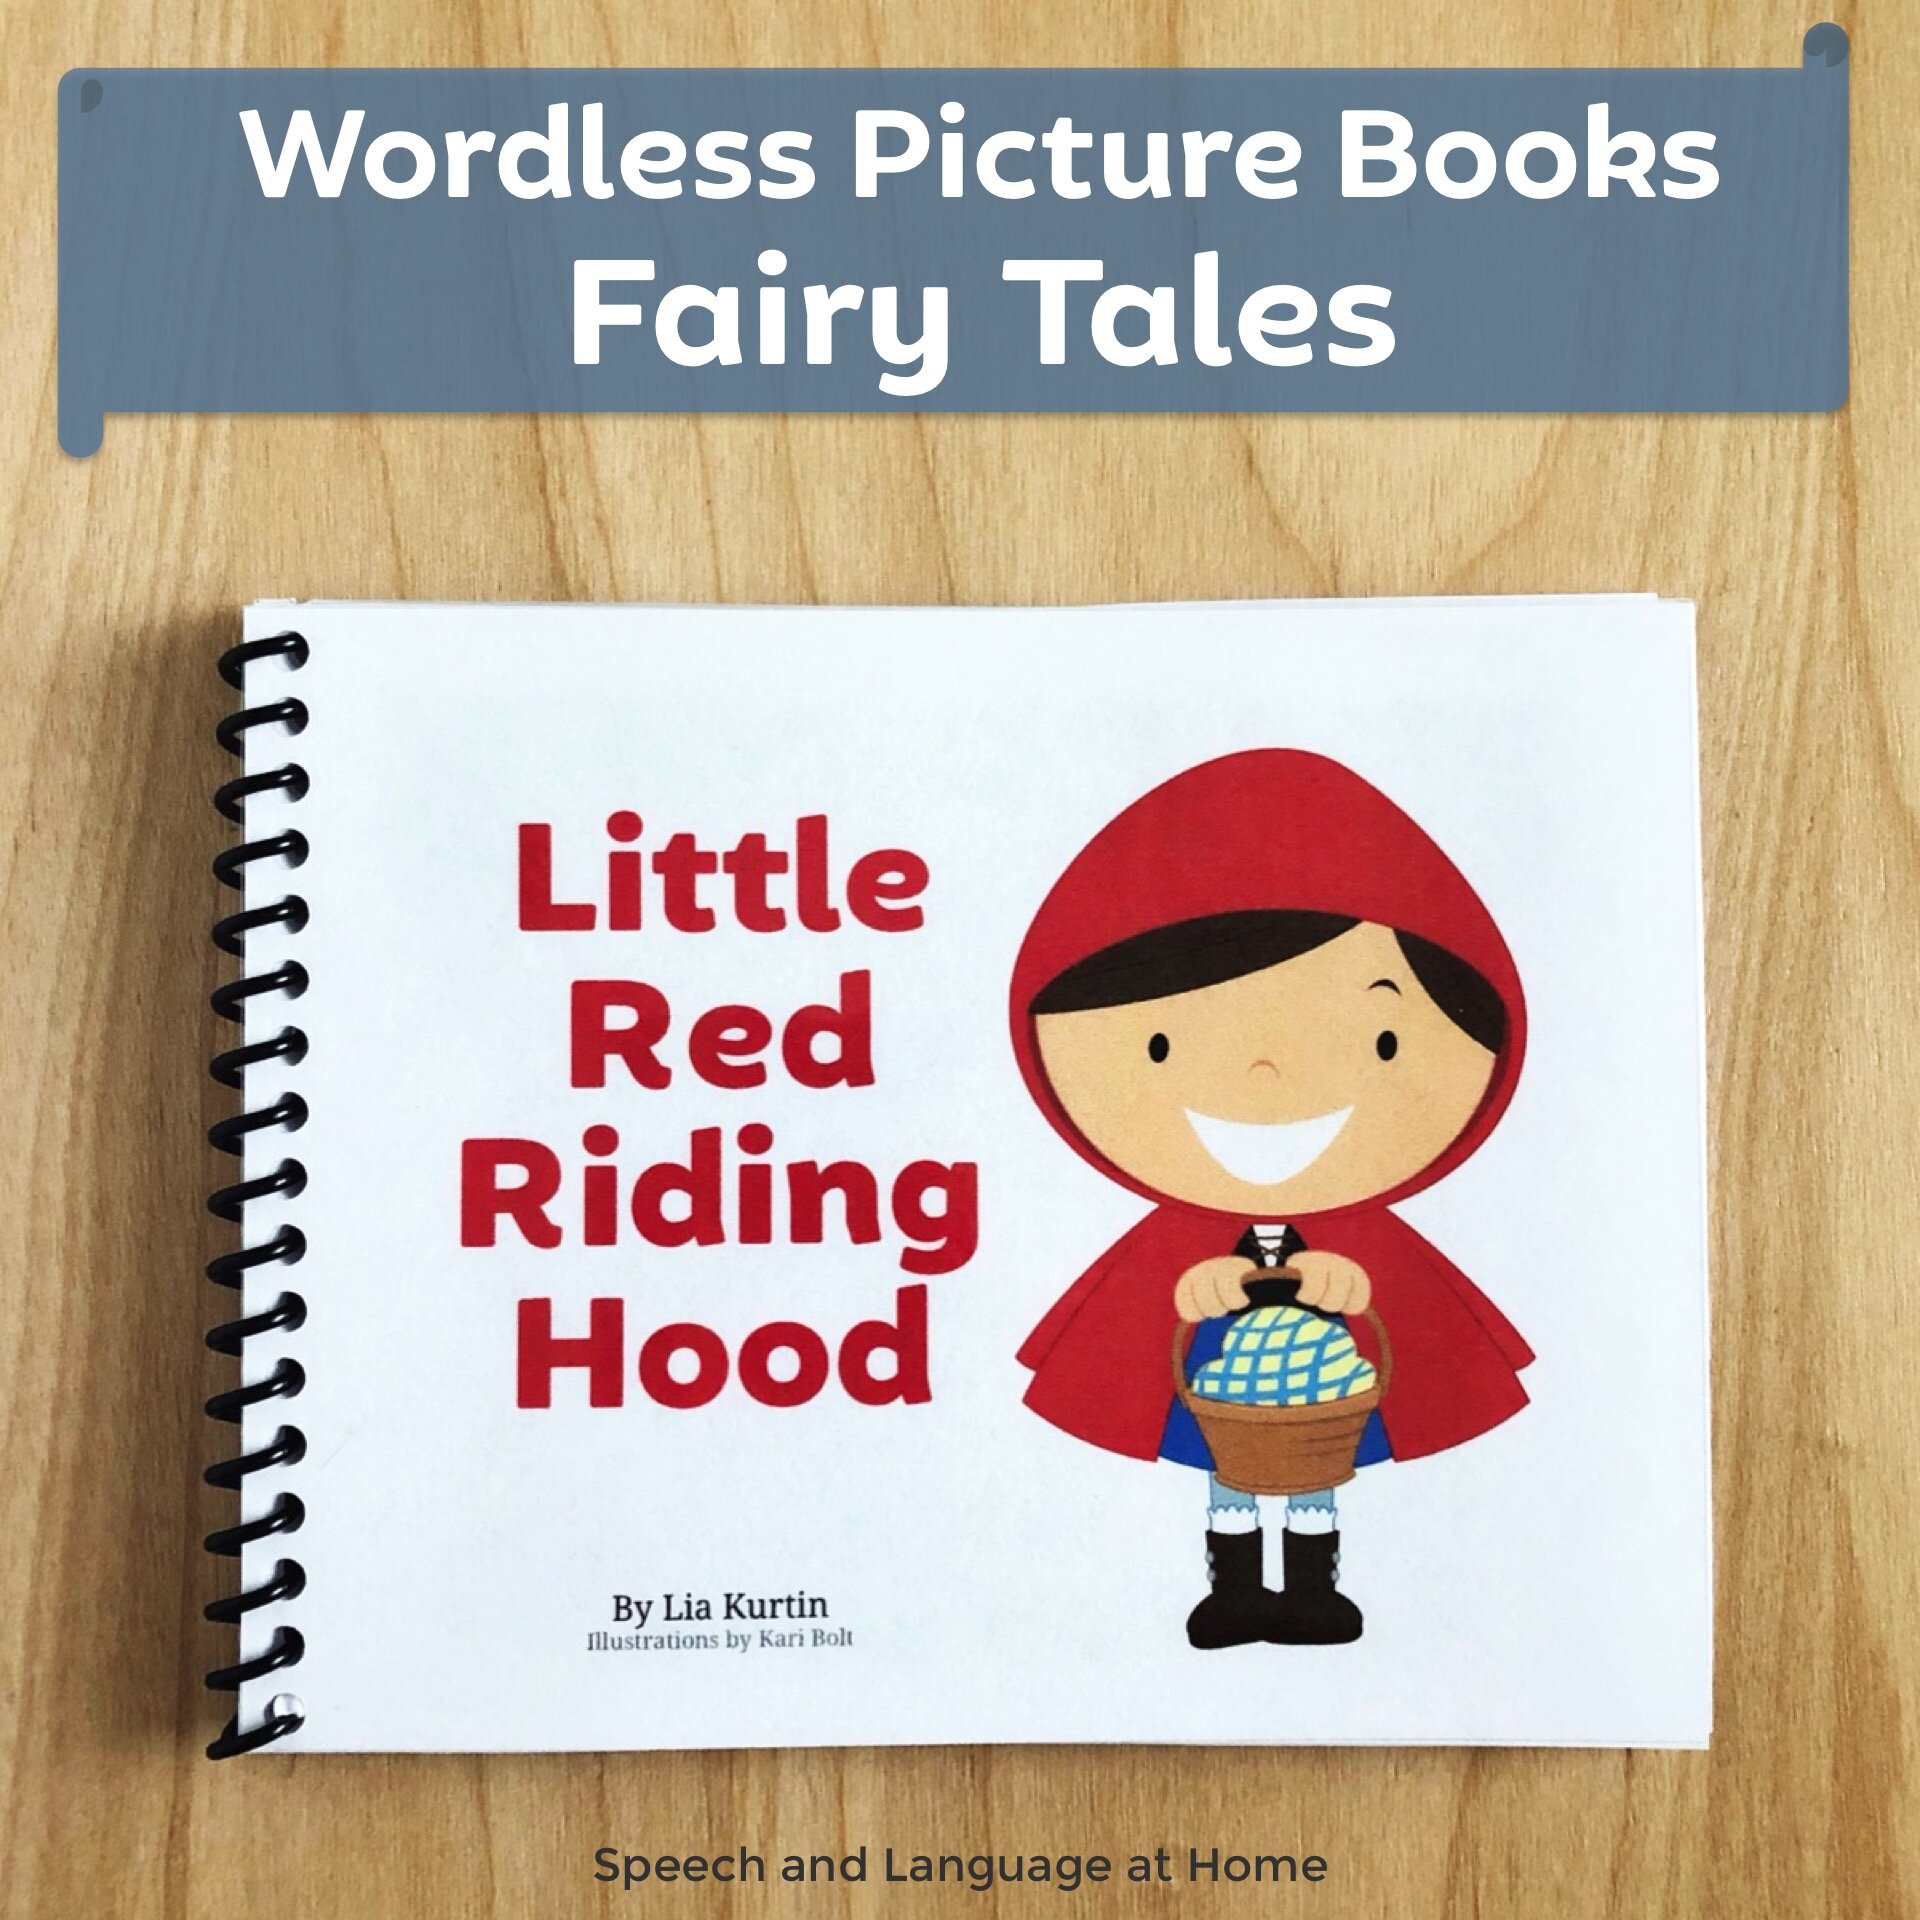 Little Red Riding Hood Wordless Picture Book Speech Activities For Preschoolers Speech And Language At Home